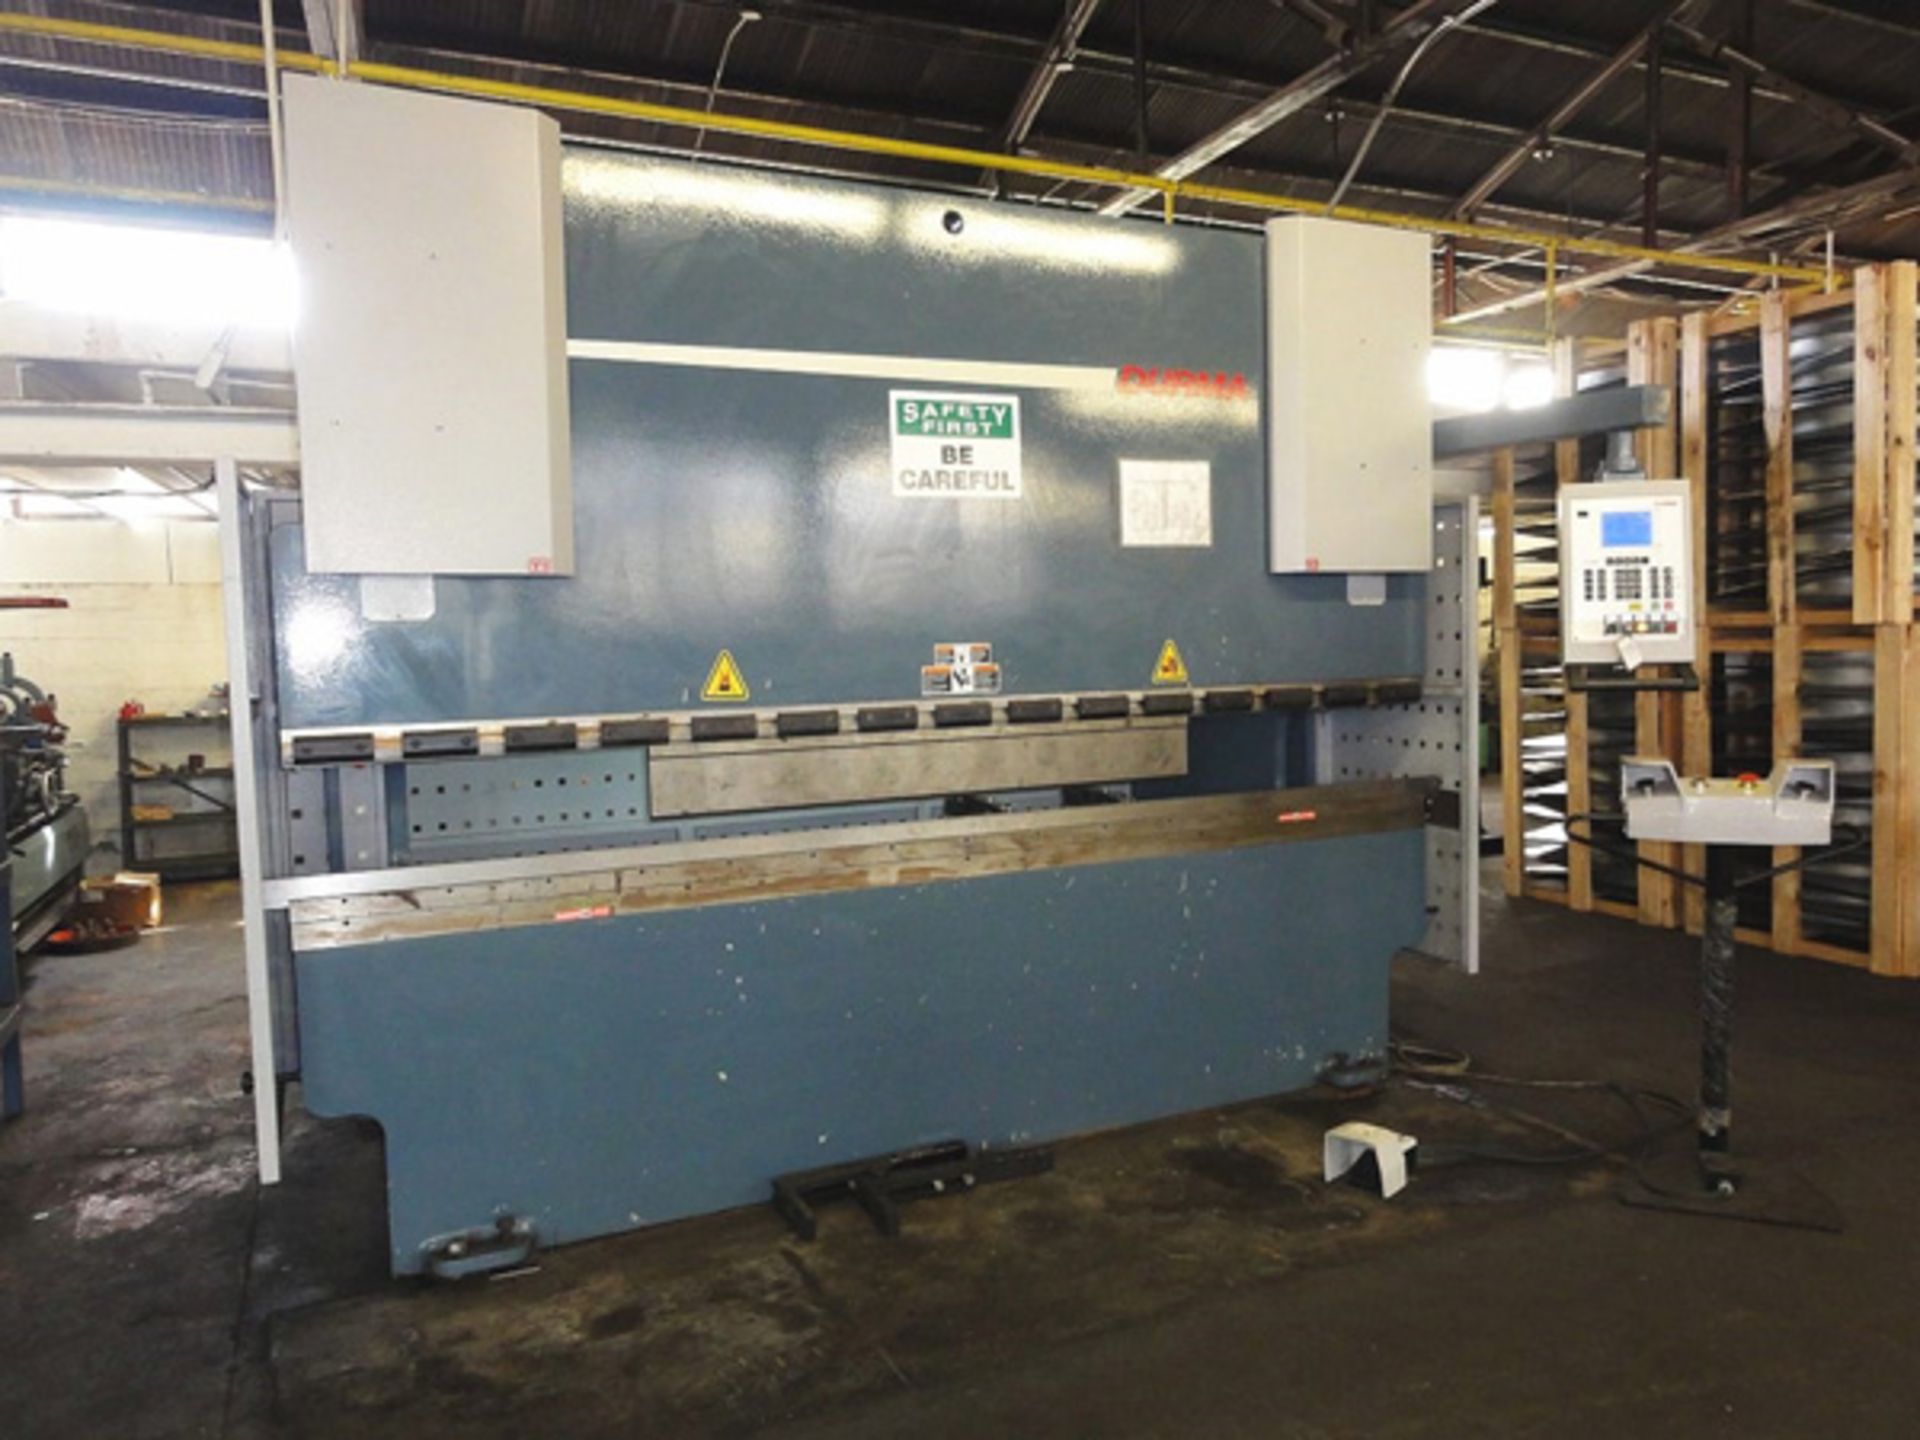 Durma CNC 3 Axis Hydraulic Press Brake 99 Ton x 10', Located In Painesville, OH - 8569P